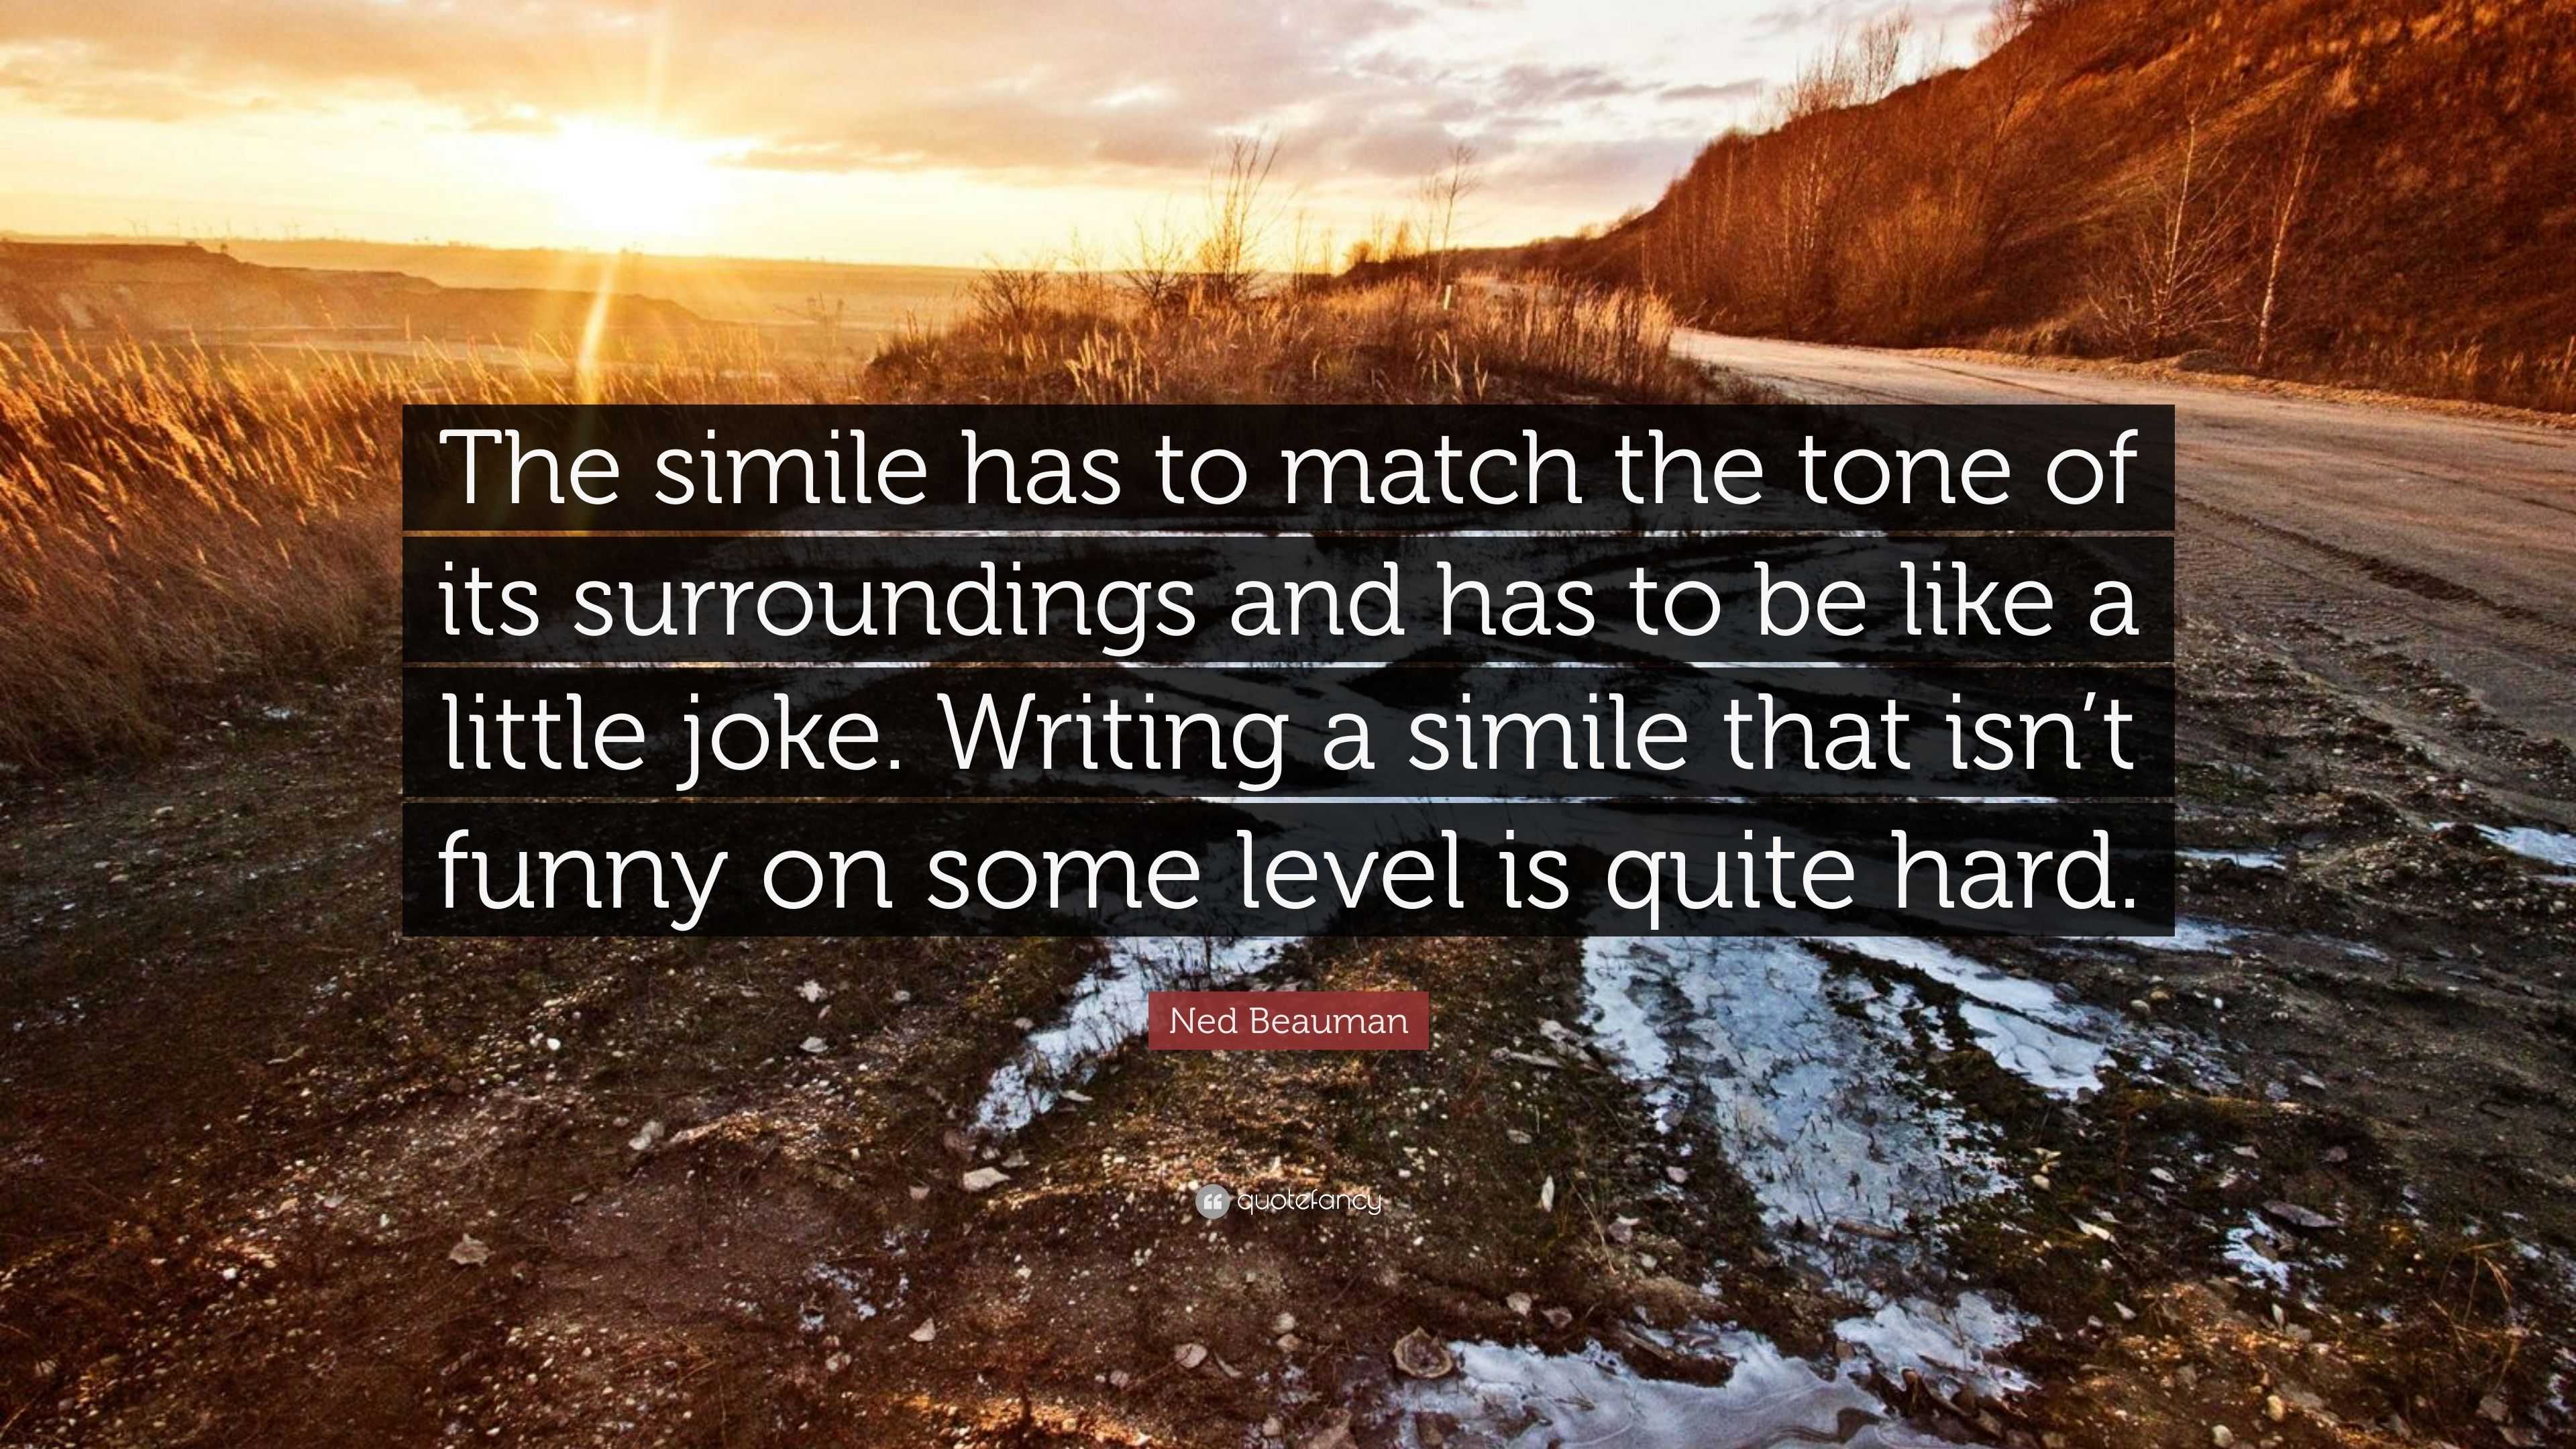 Ned Beauman Quote: “The simile has to match the tone of its surroundings  and has to be like a little joke. Writing a simile that isn't funny...”